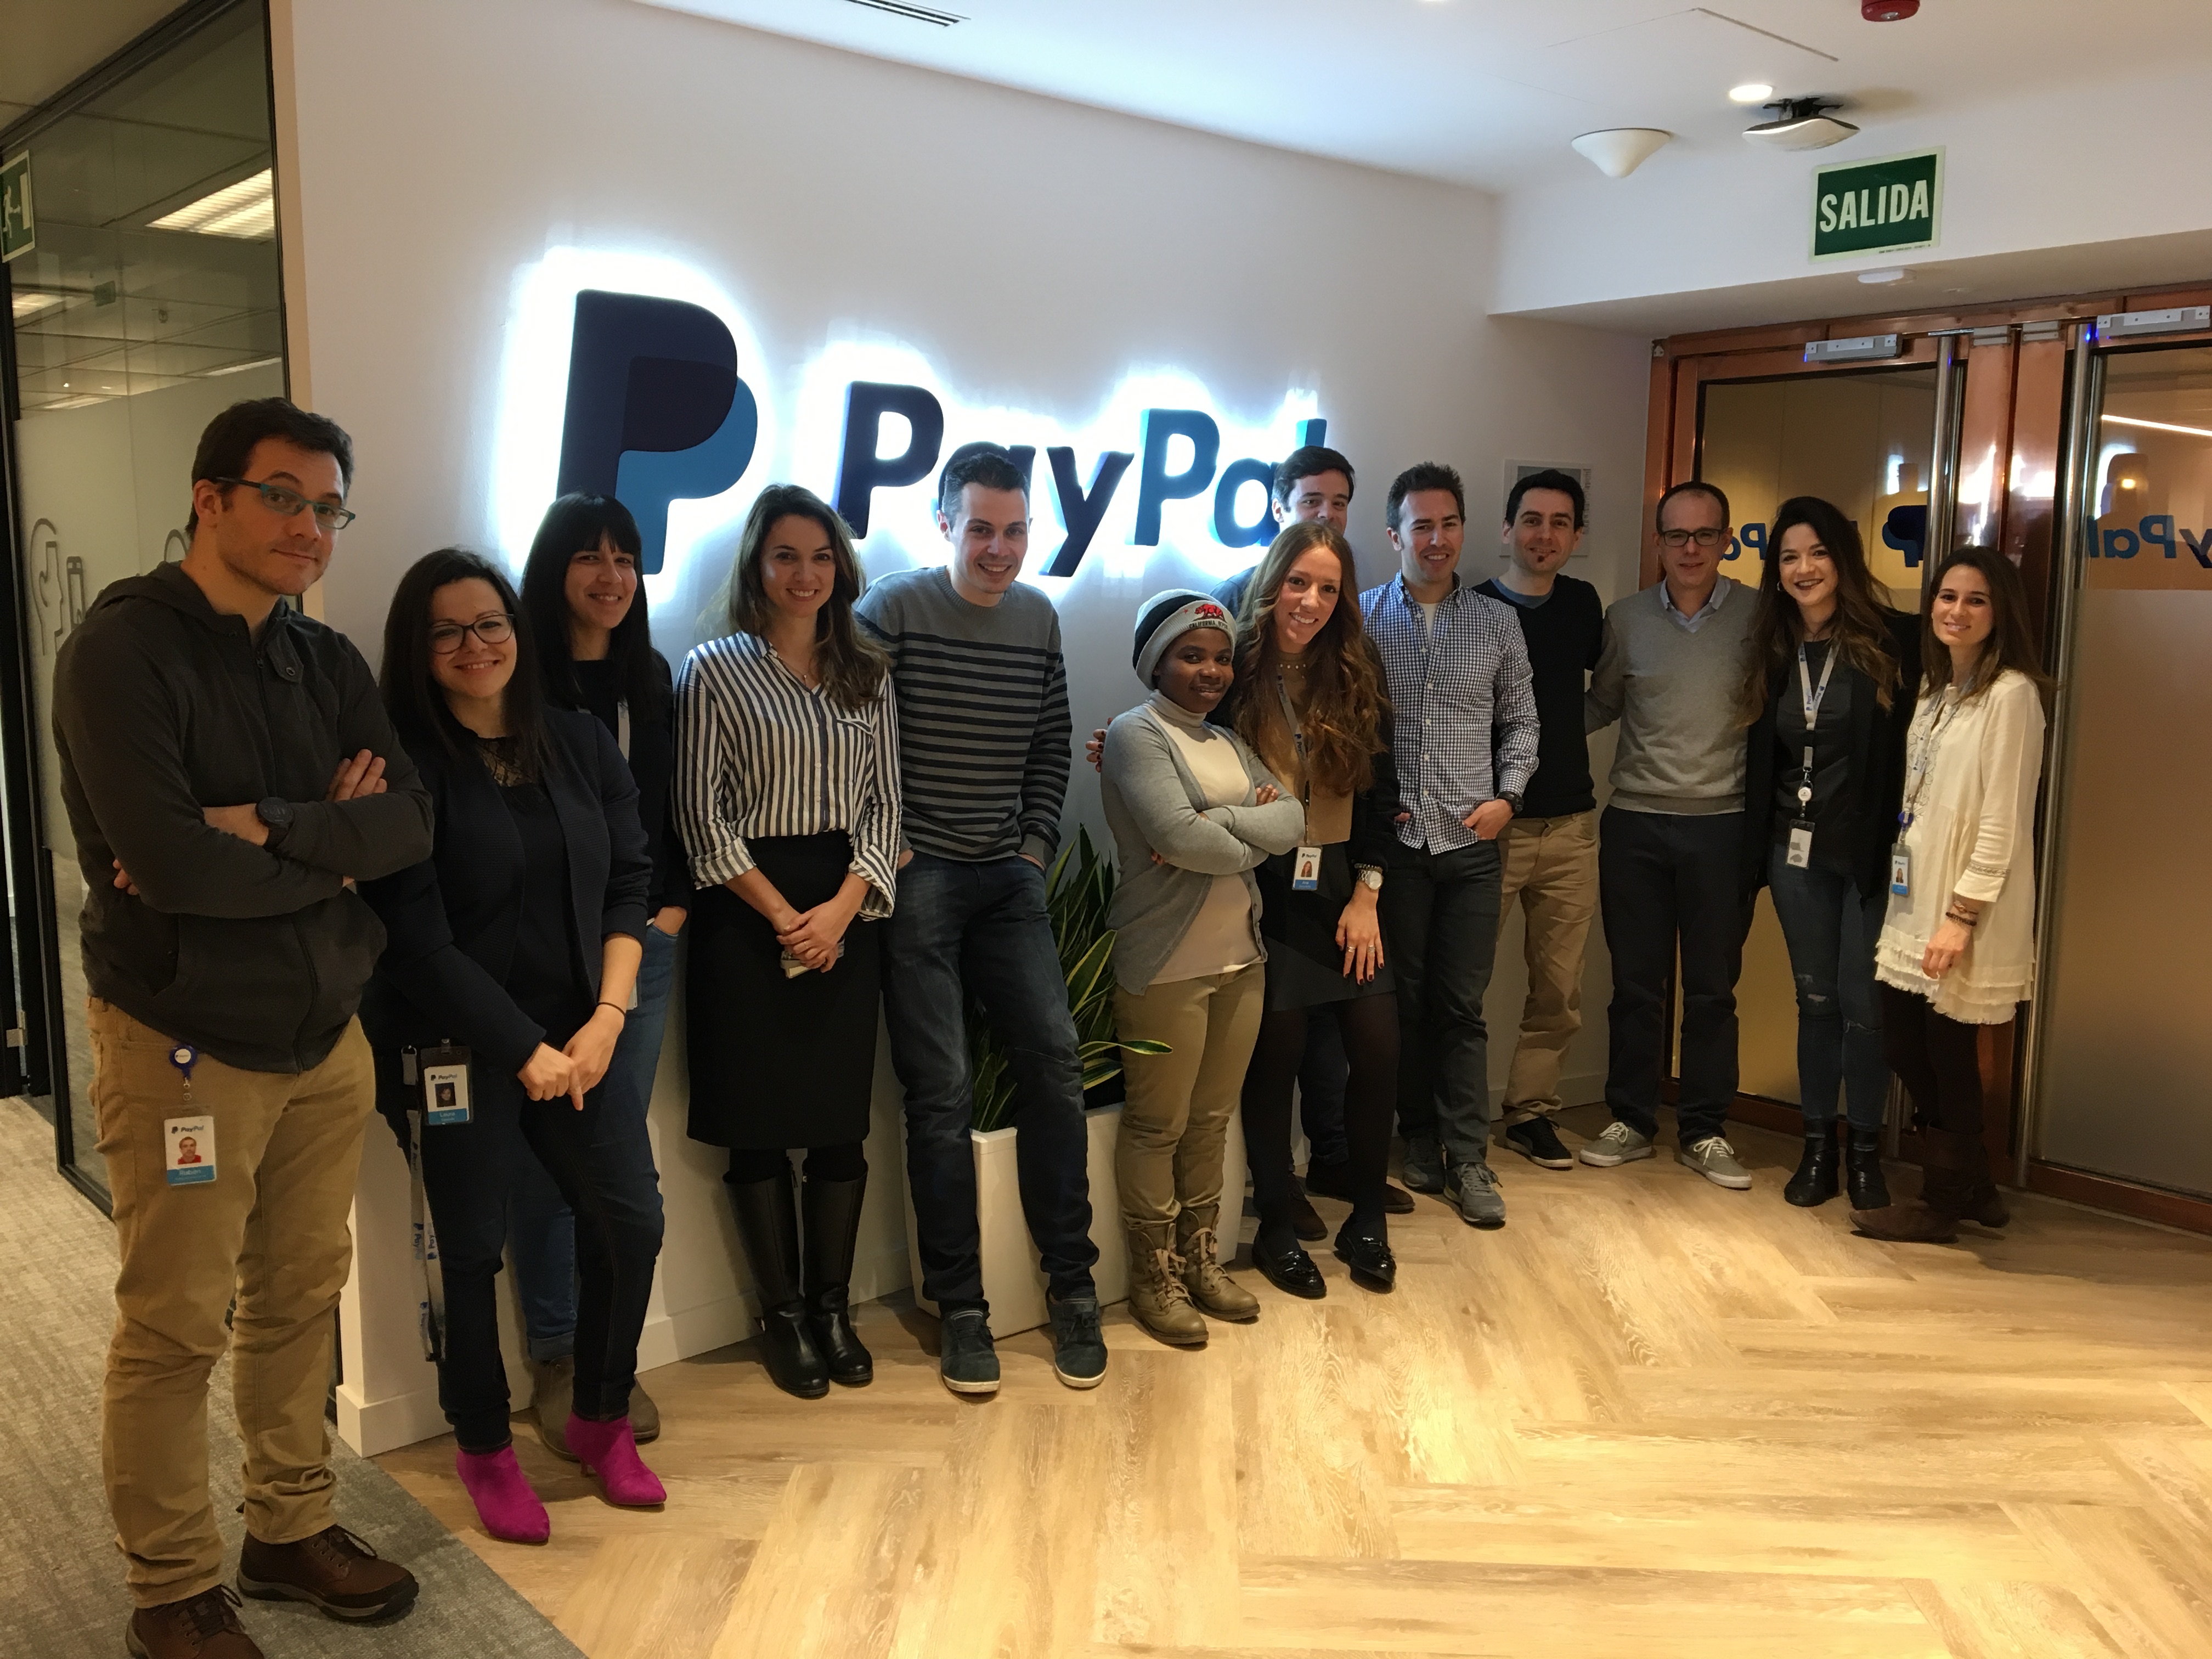 PayPal y Gentille Synergie